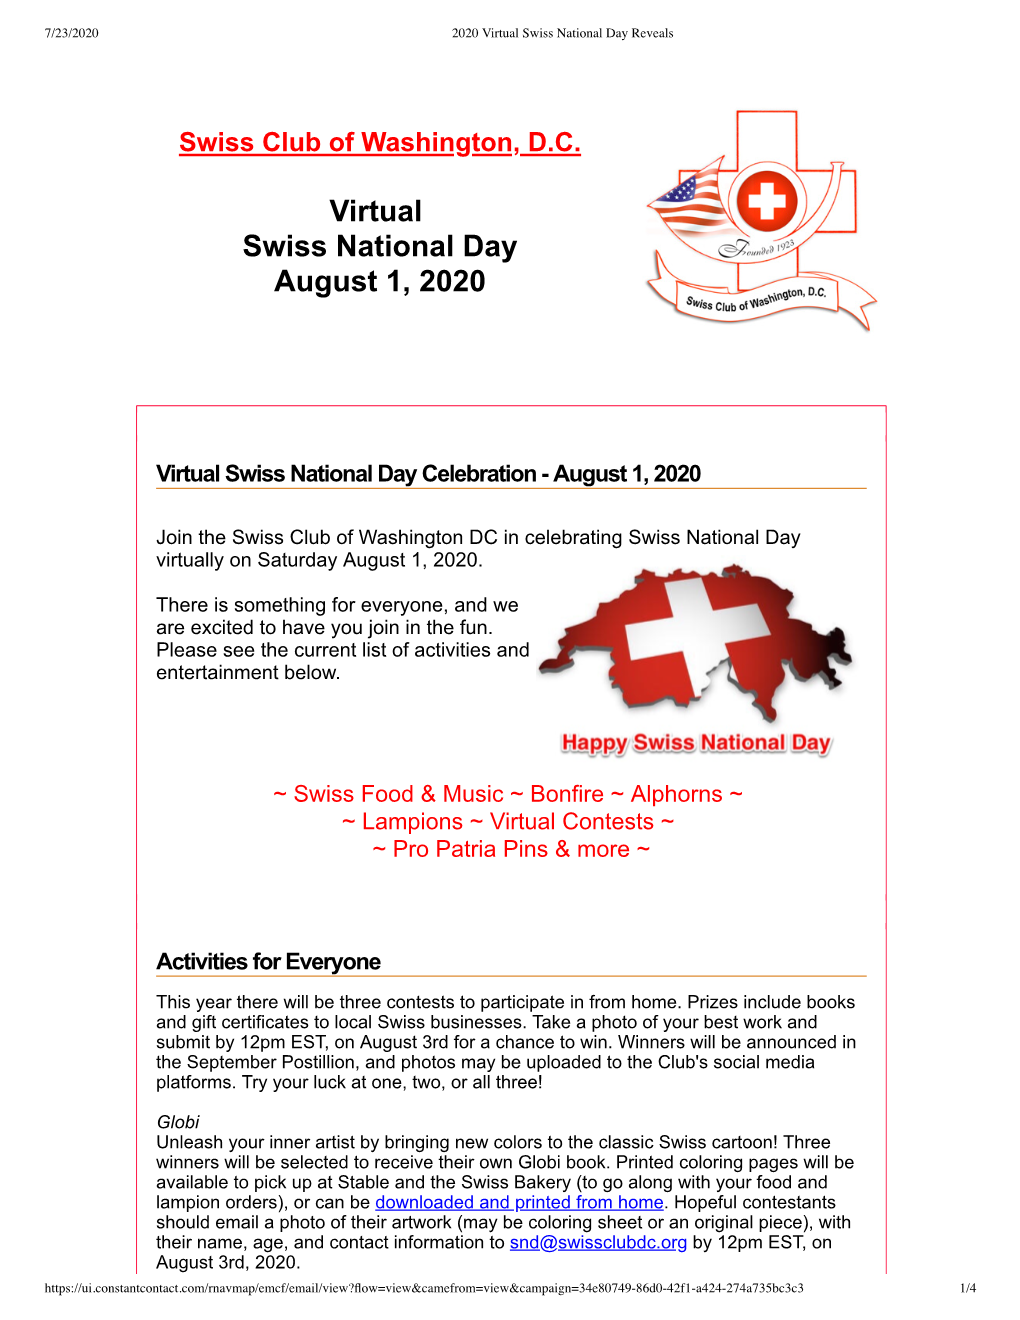 Virtual Swiss National Day August 1, 2020